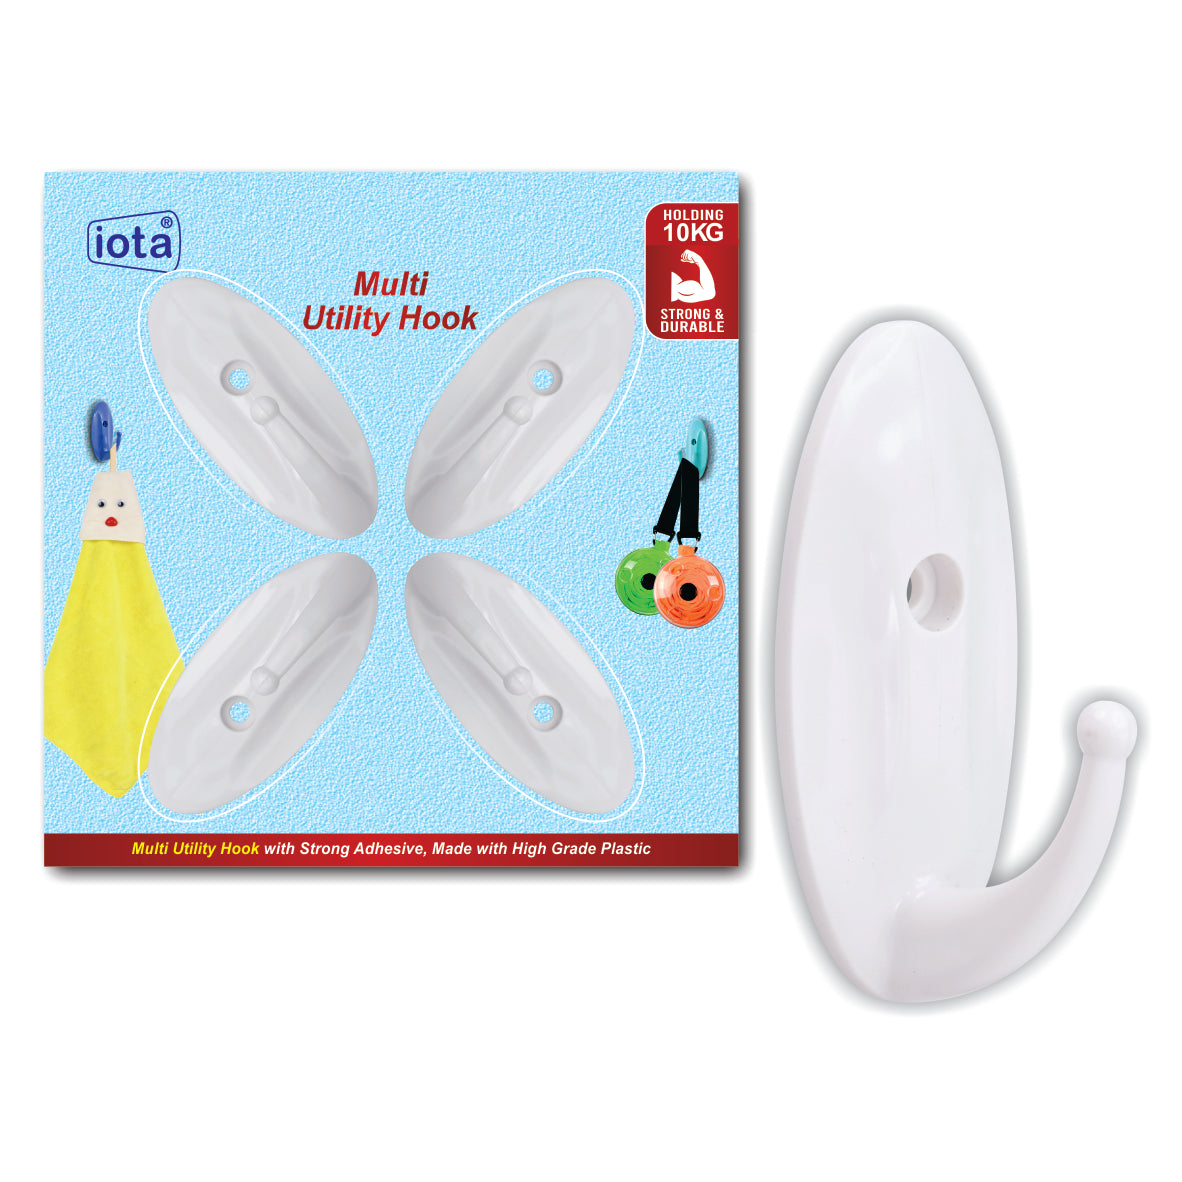 iota Small Multi Utility Wall Hooks, Holds Up to 10Kgs, with Gumming Strips Set Of-4 Hooks